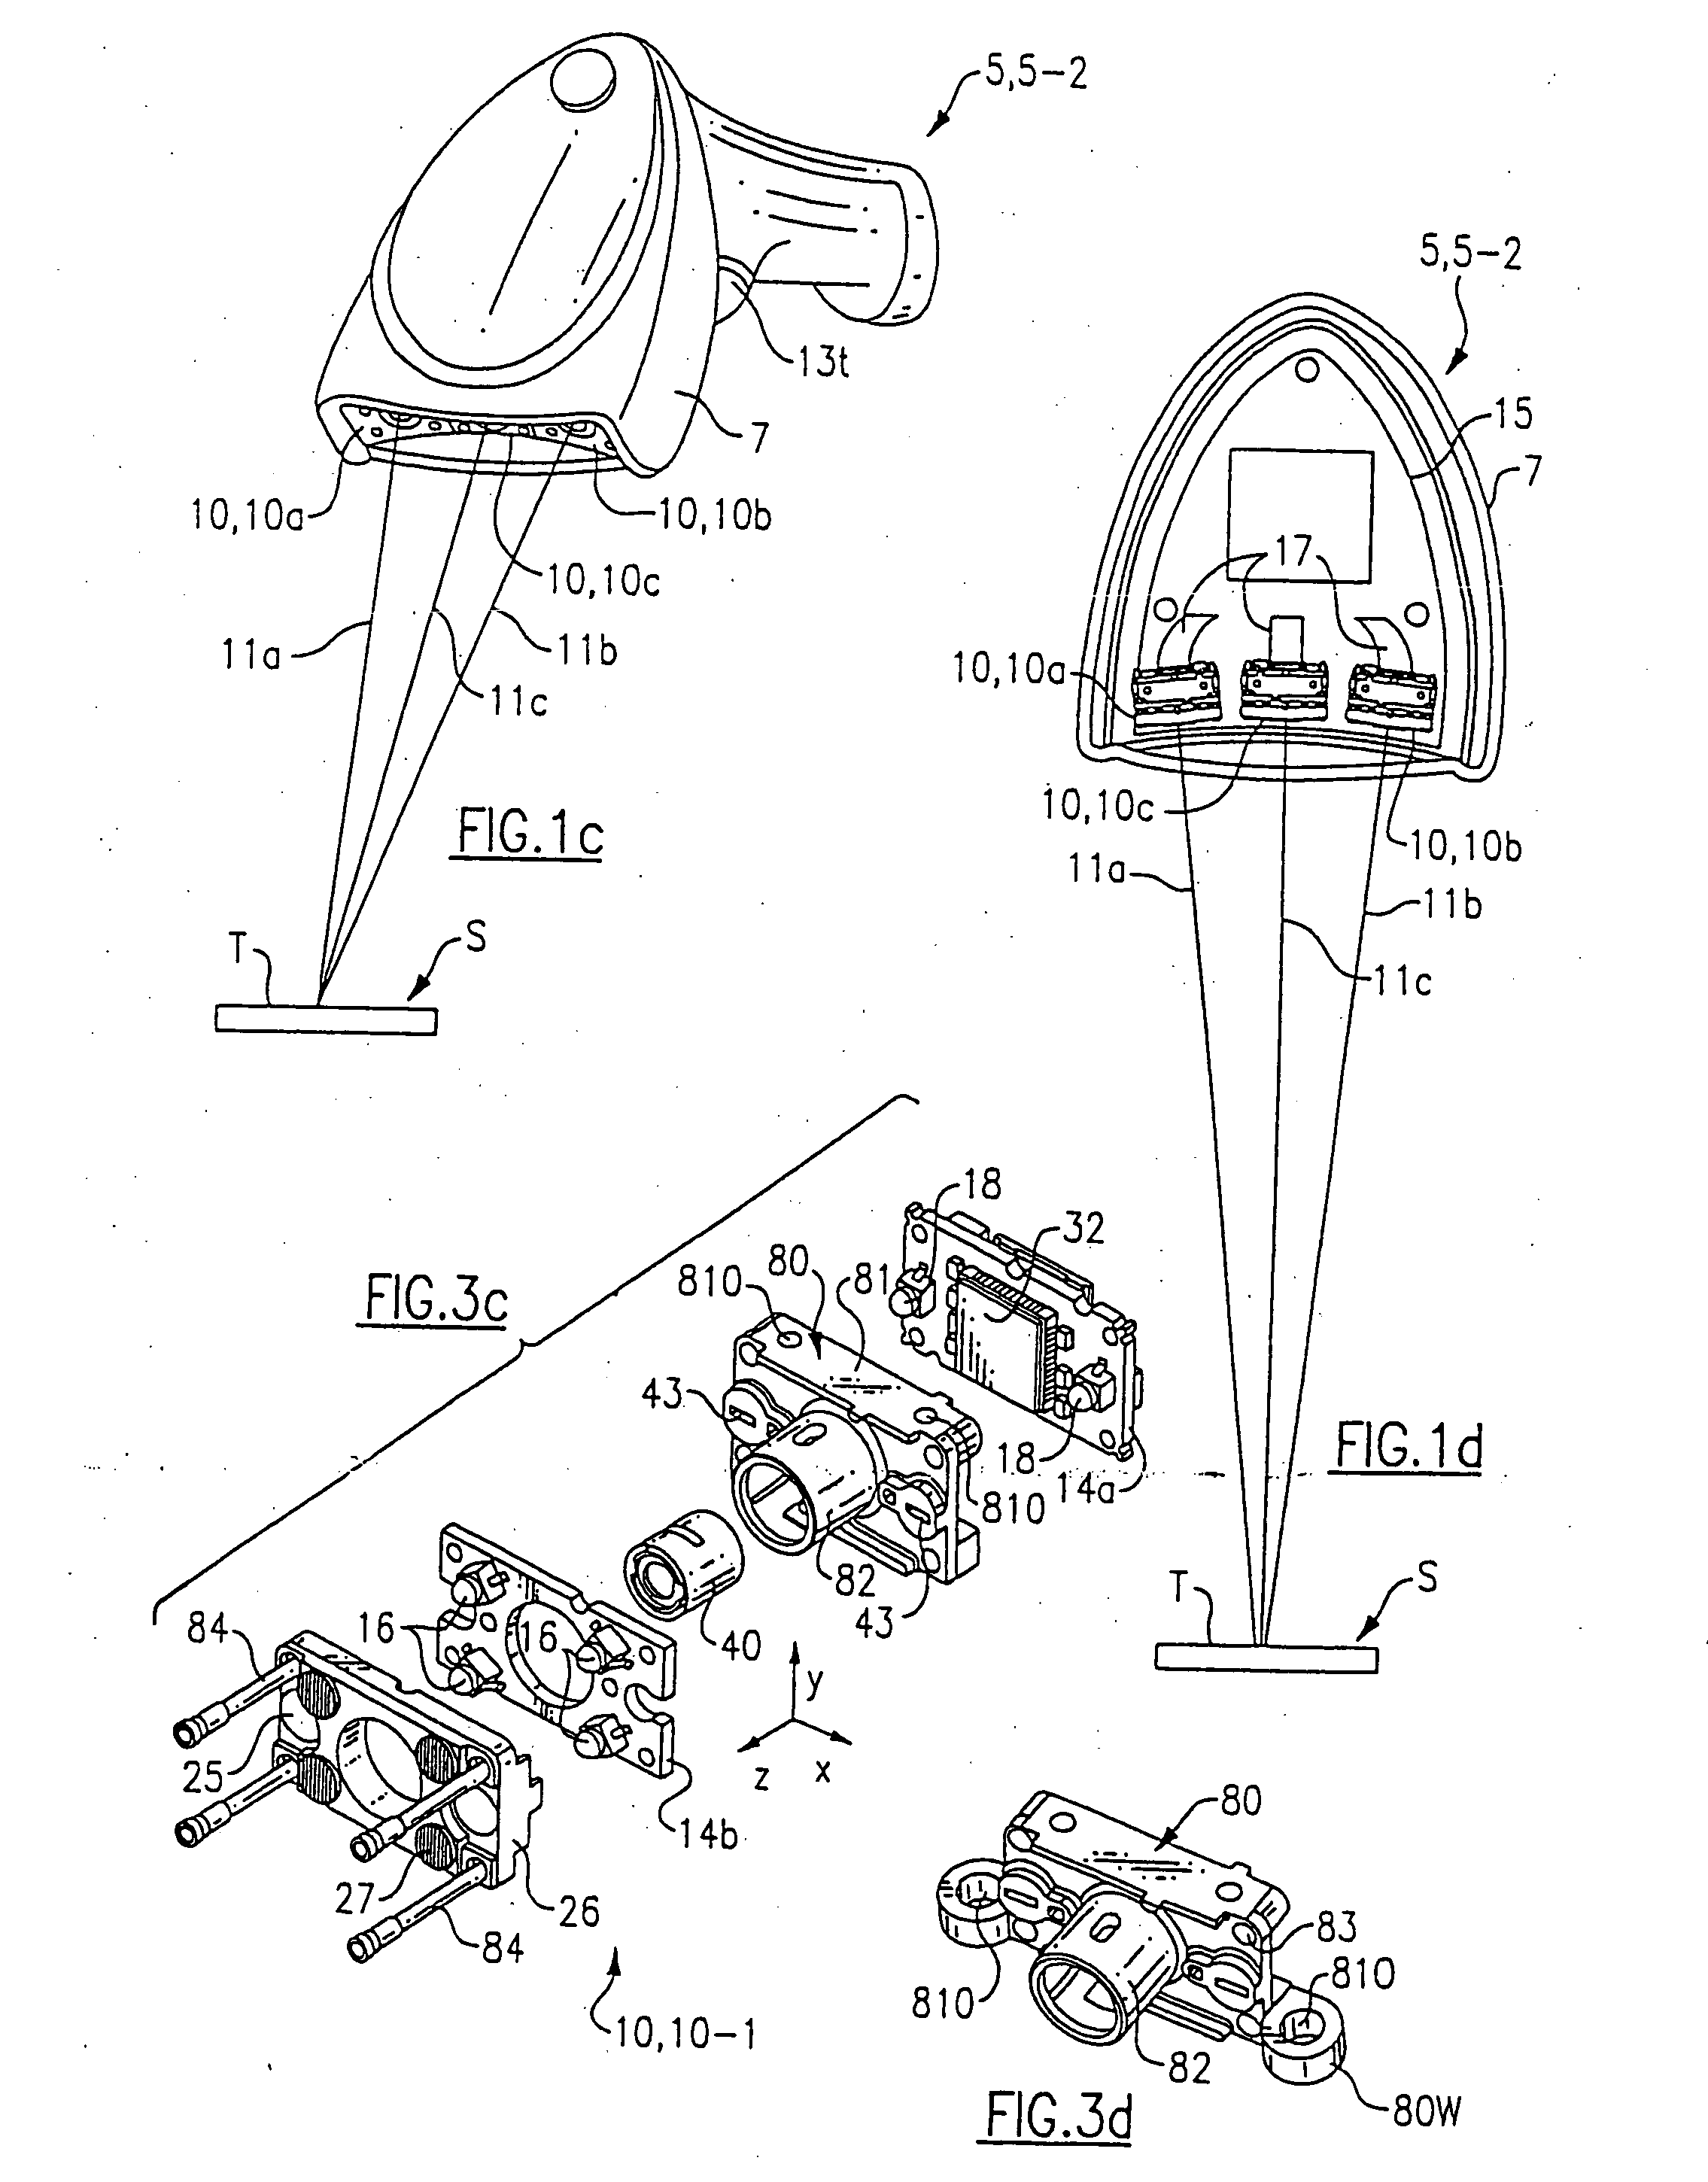 Optical reader having a plurality of imaging modules